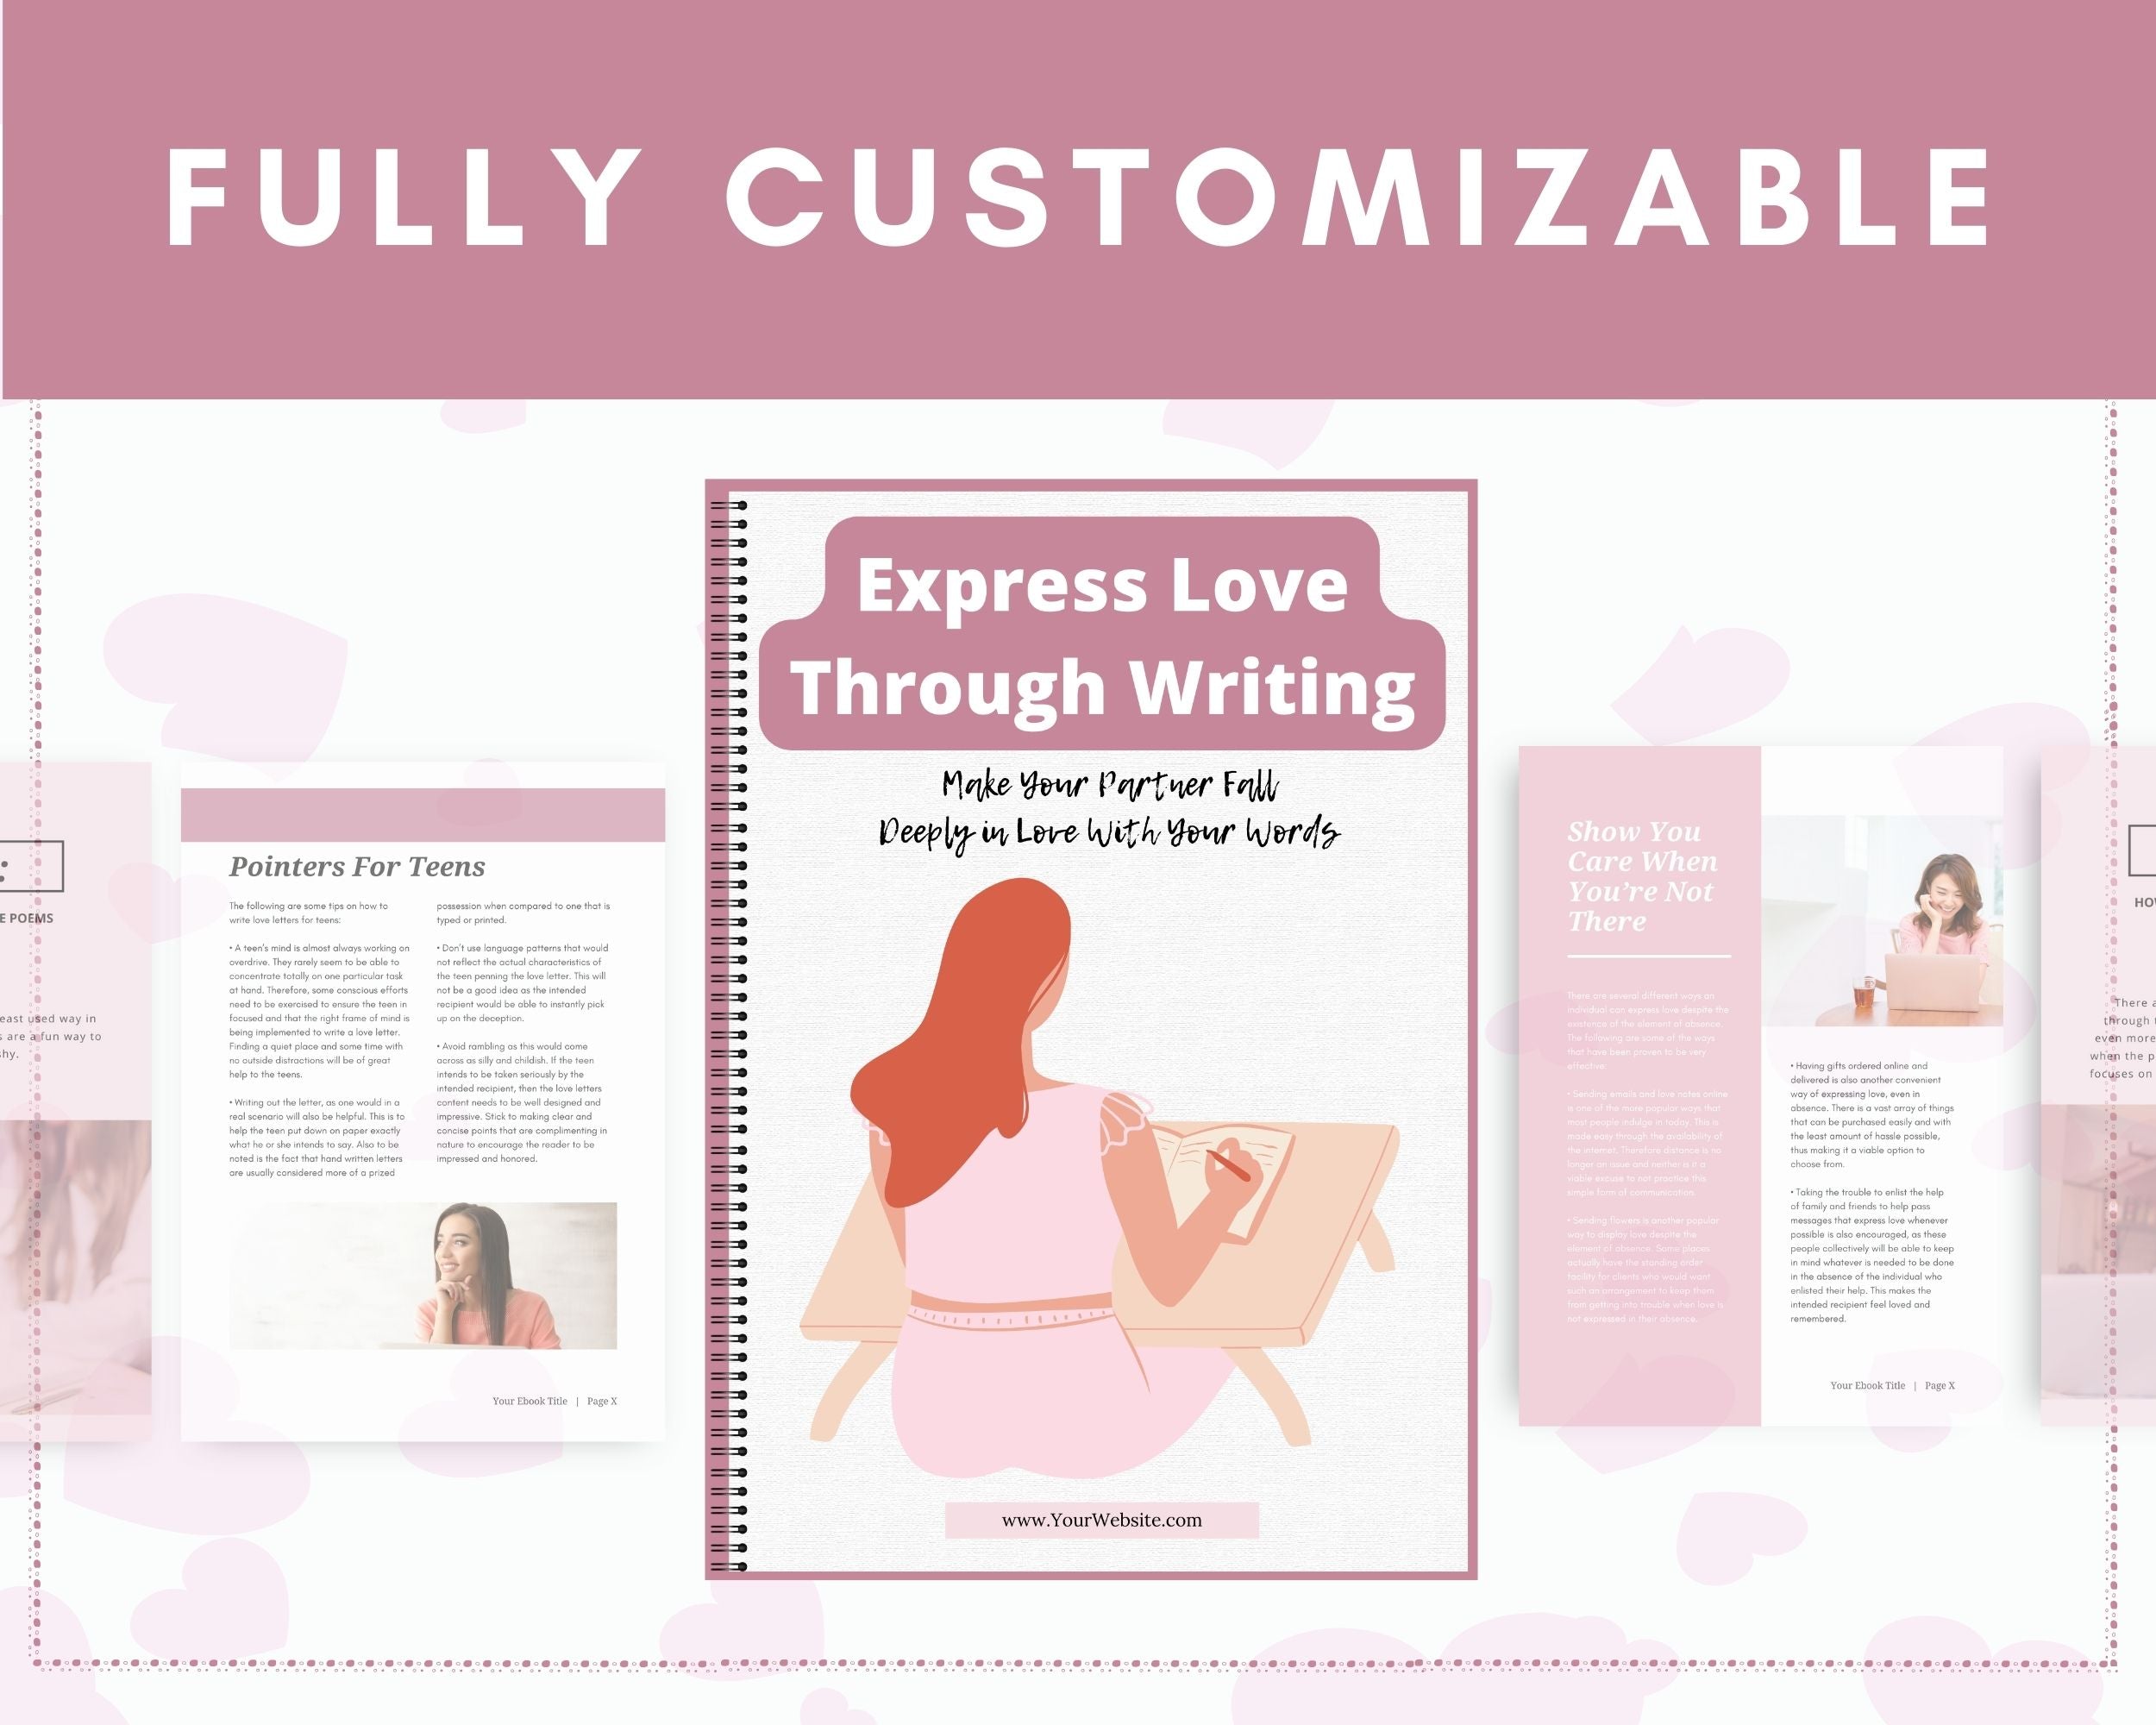 Editable Express Love Through Writing Mini Ebook | Done-for-You Ebook in Canva | Rebrandable and Resizable Canva Template